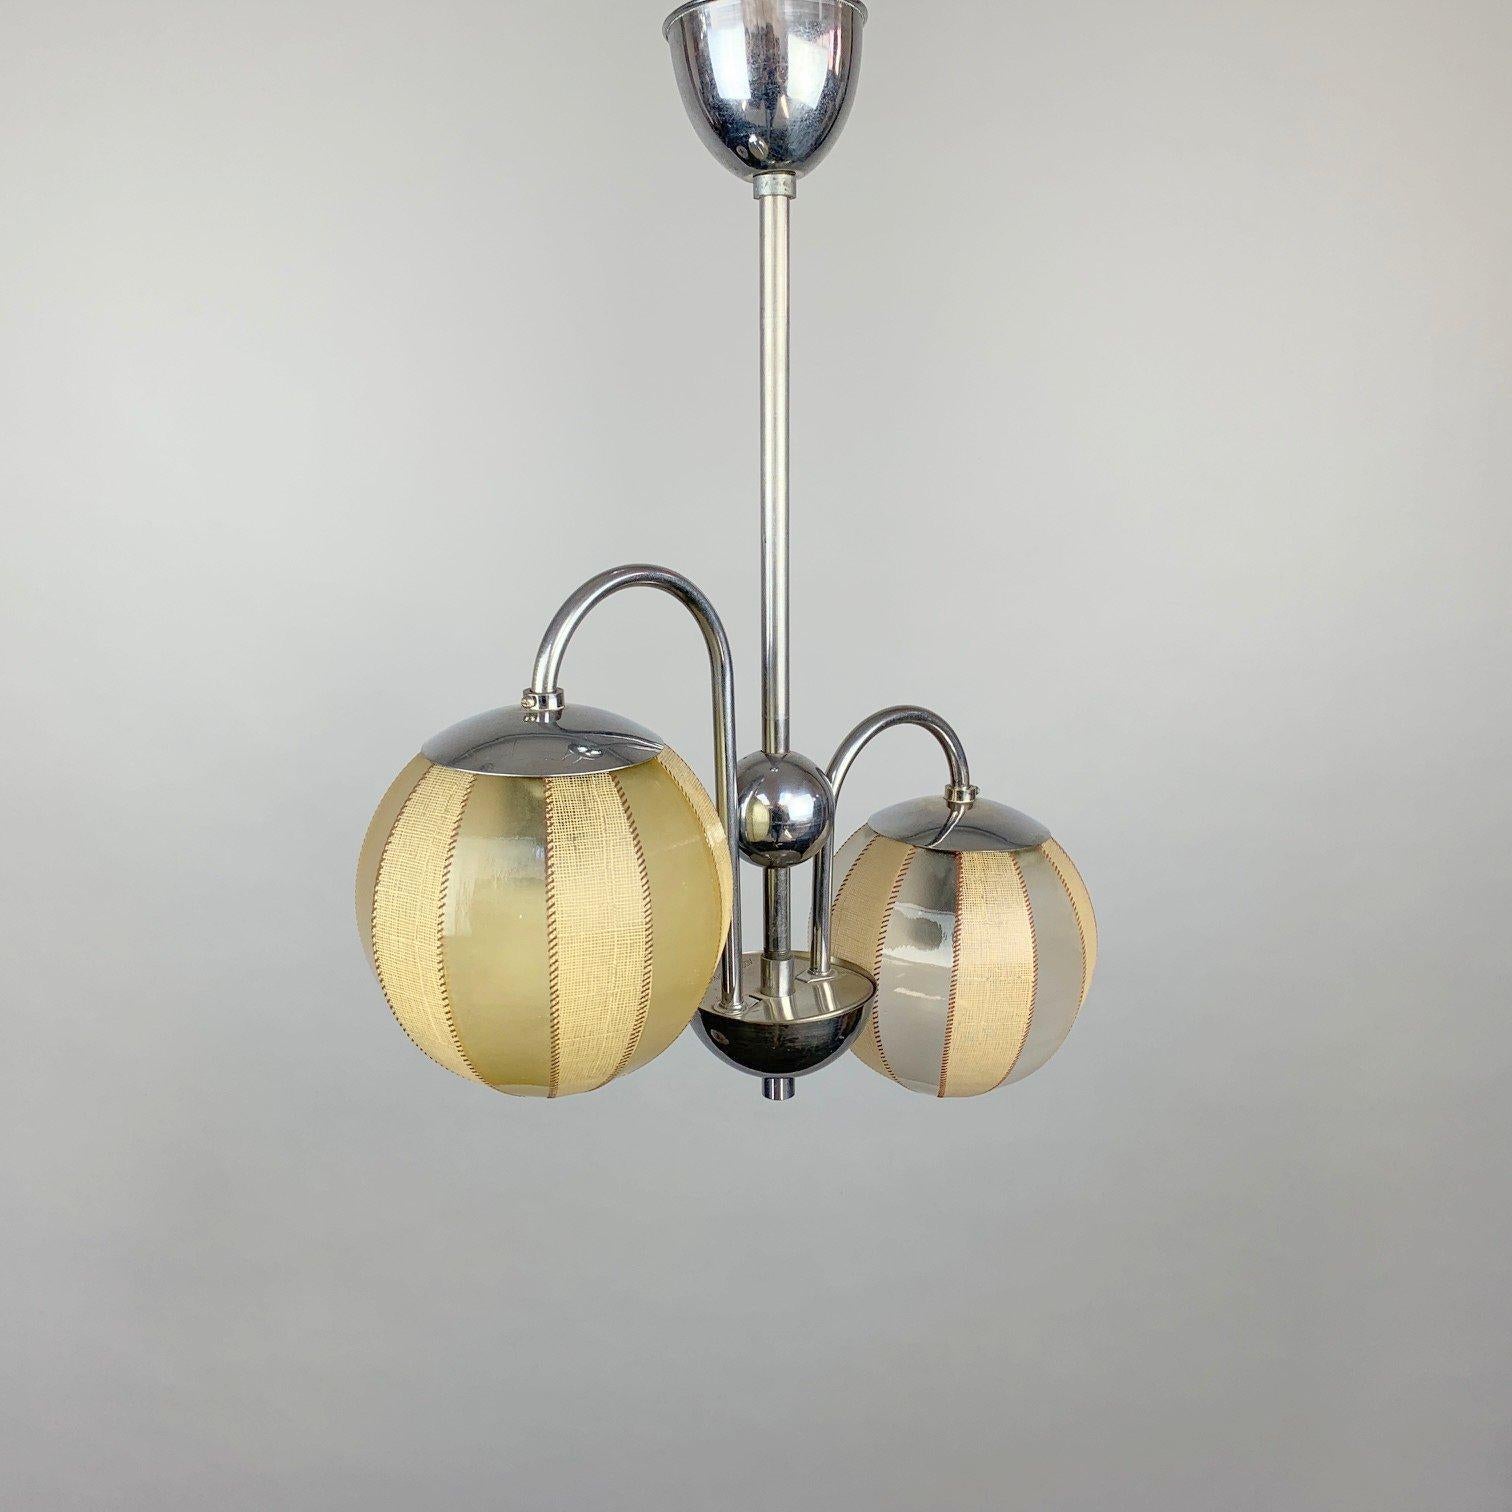 Beautiful two-arm art deco chandelier, made of chrome and plastic in former Czechoslovakia by Napako in the 1930's. In very good vintage condition. Original wiring, fully functional. 
Bulbs: 2 x E27 or E26.